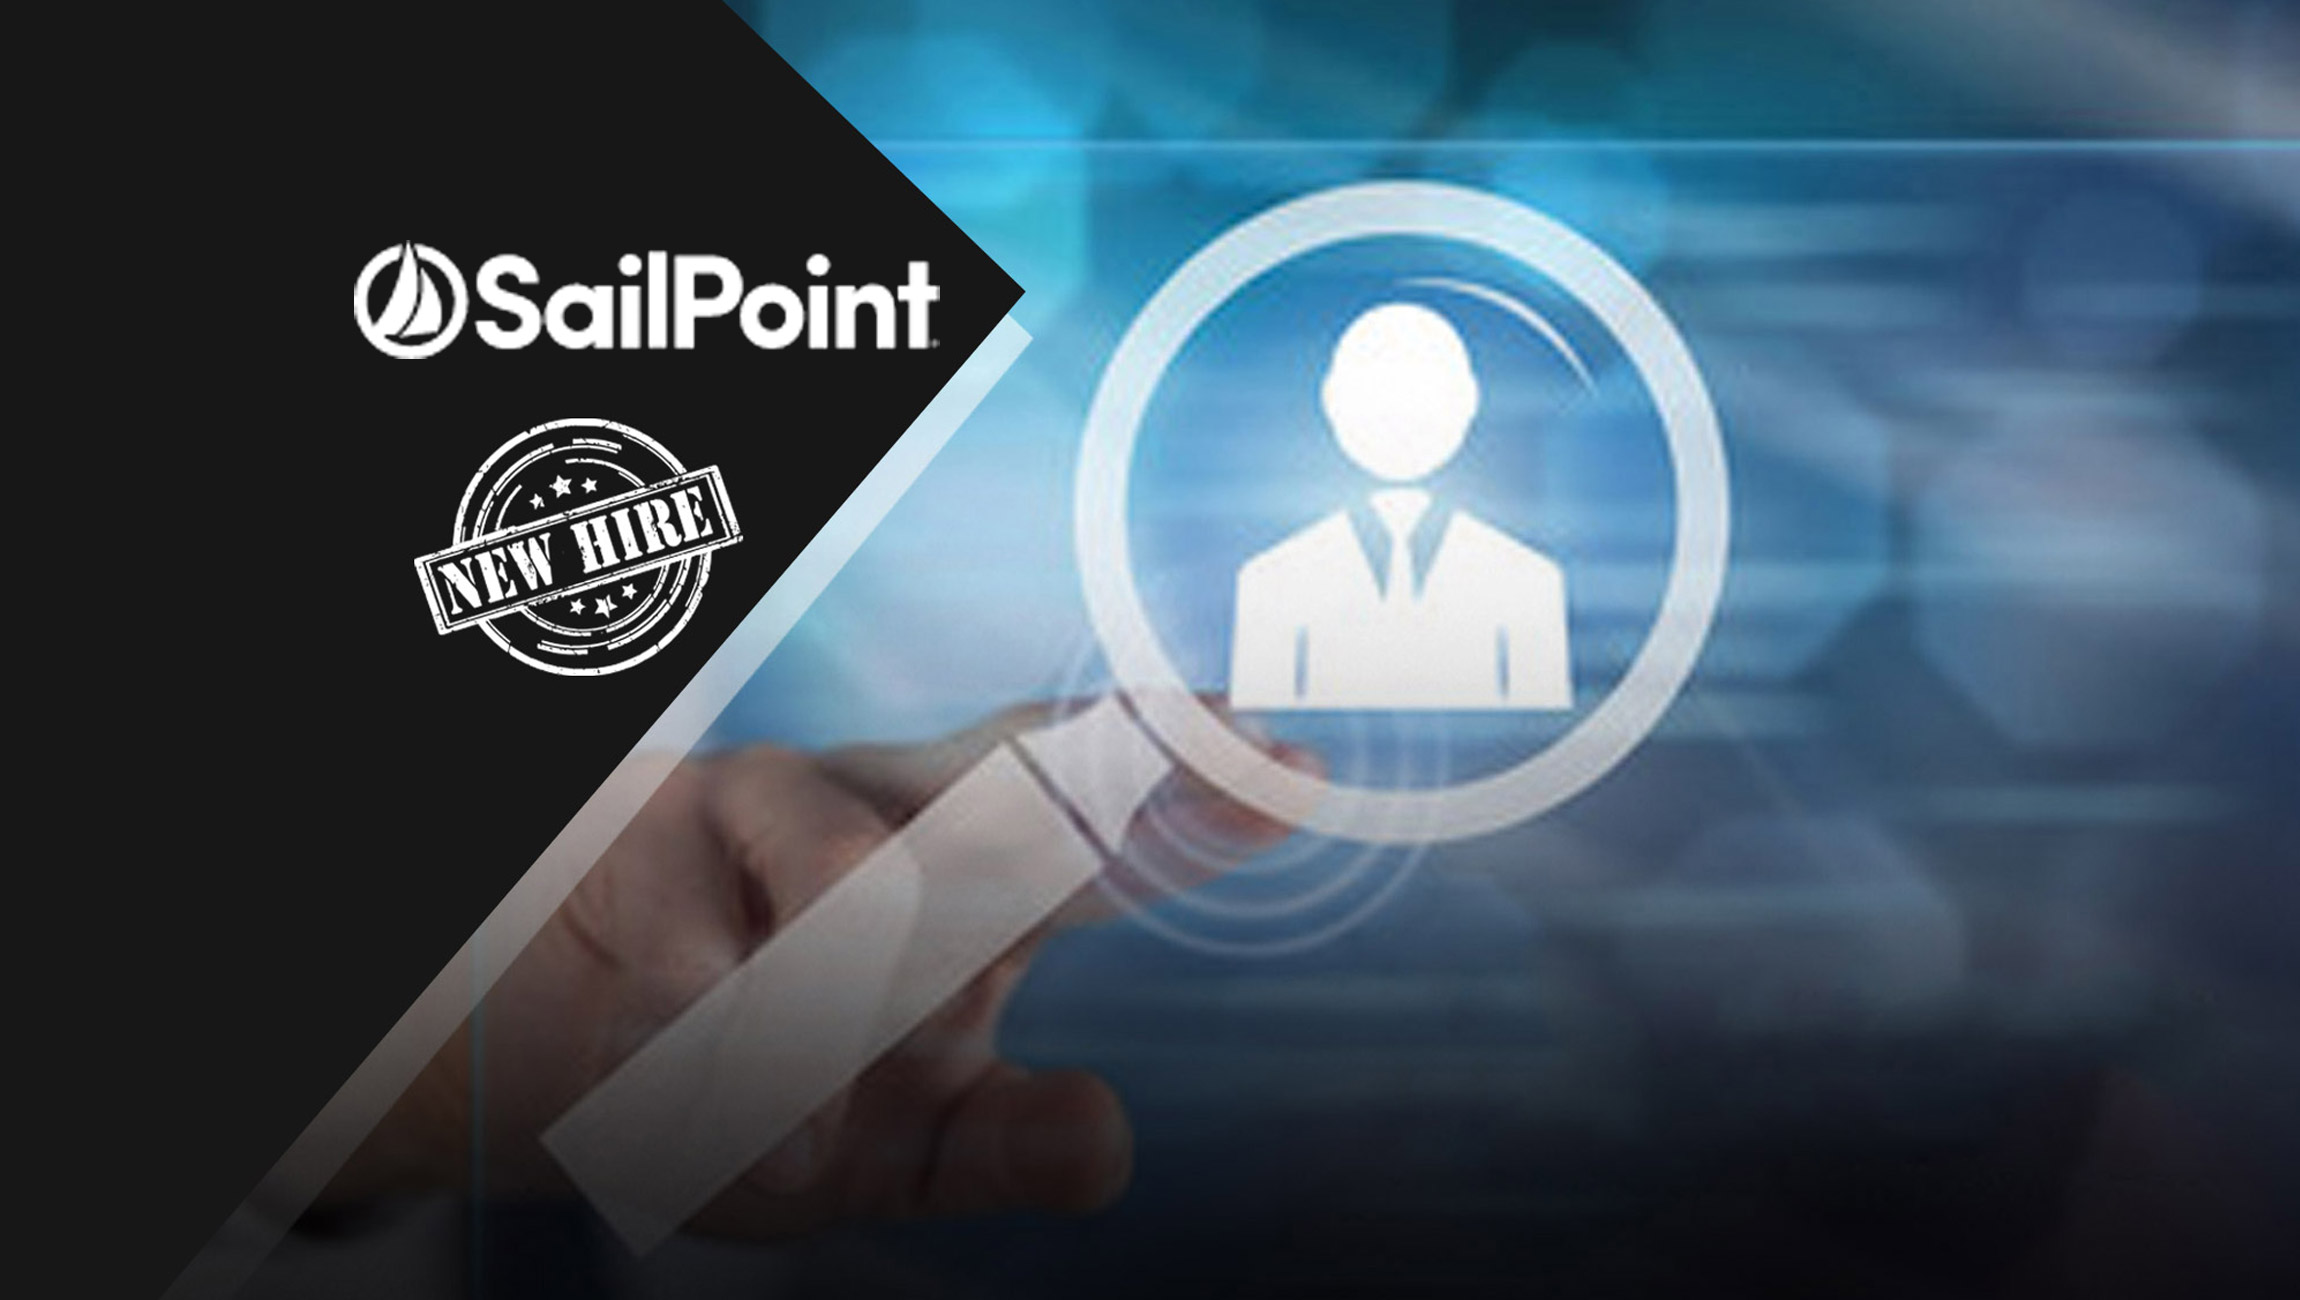 SailPoint Announces Appointment of Ron Green to Board of Directors